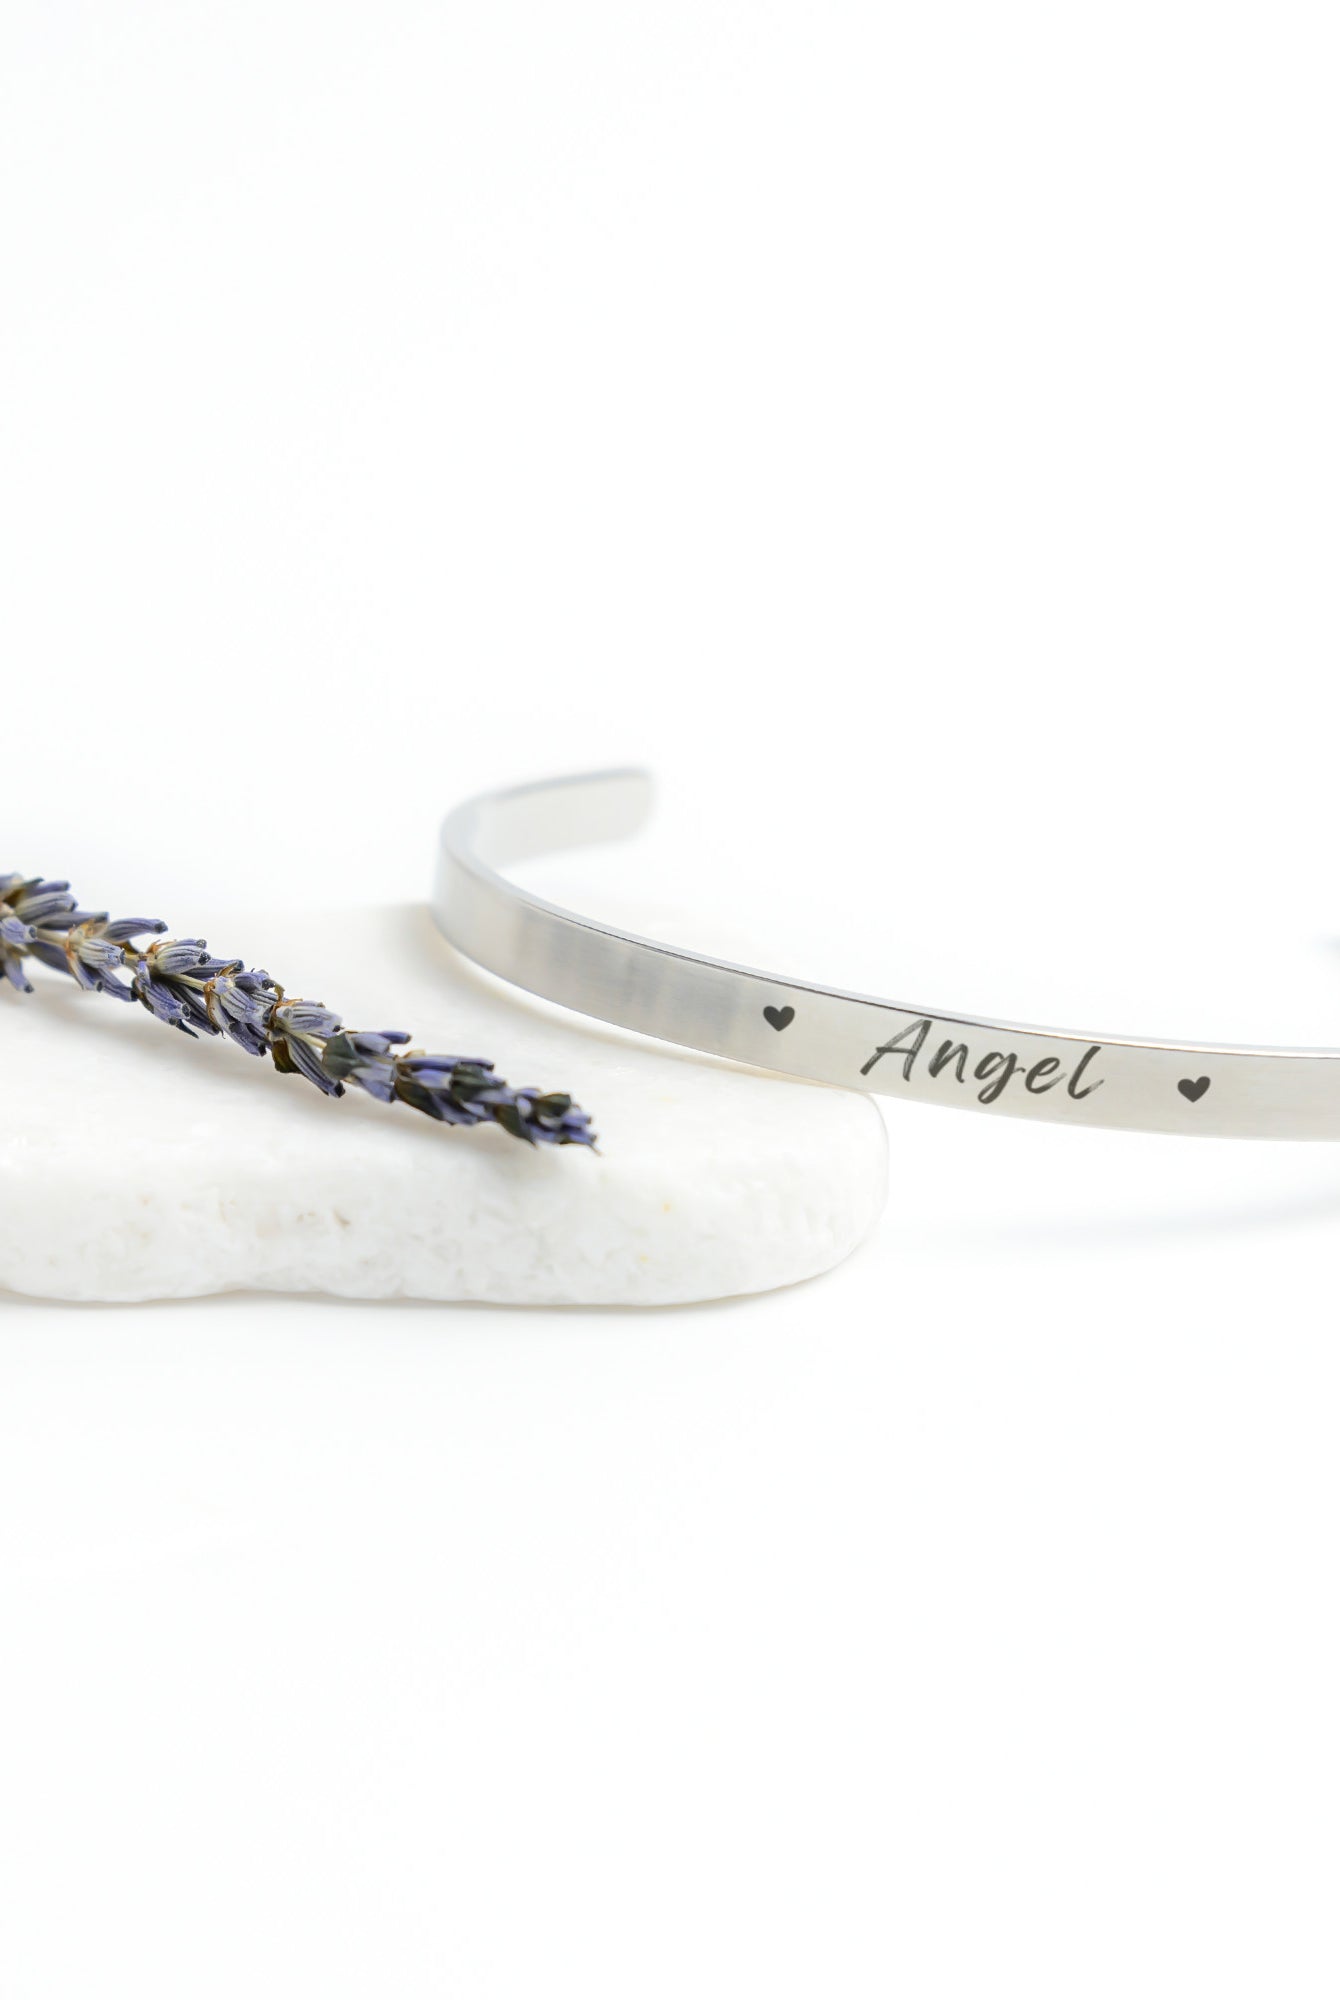 Silver Cuff Bracelet with the word "Angel" engraved in the front.  The inside reads, "I love you to the moon and back."